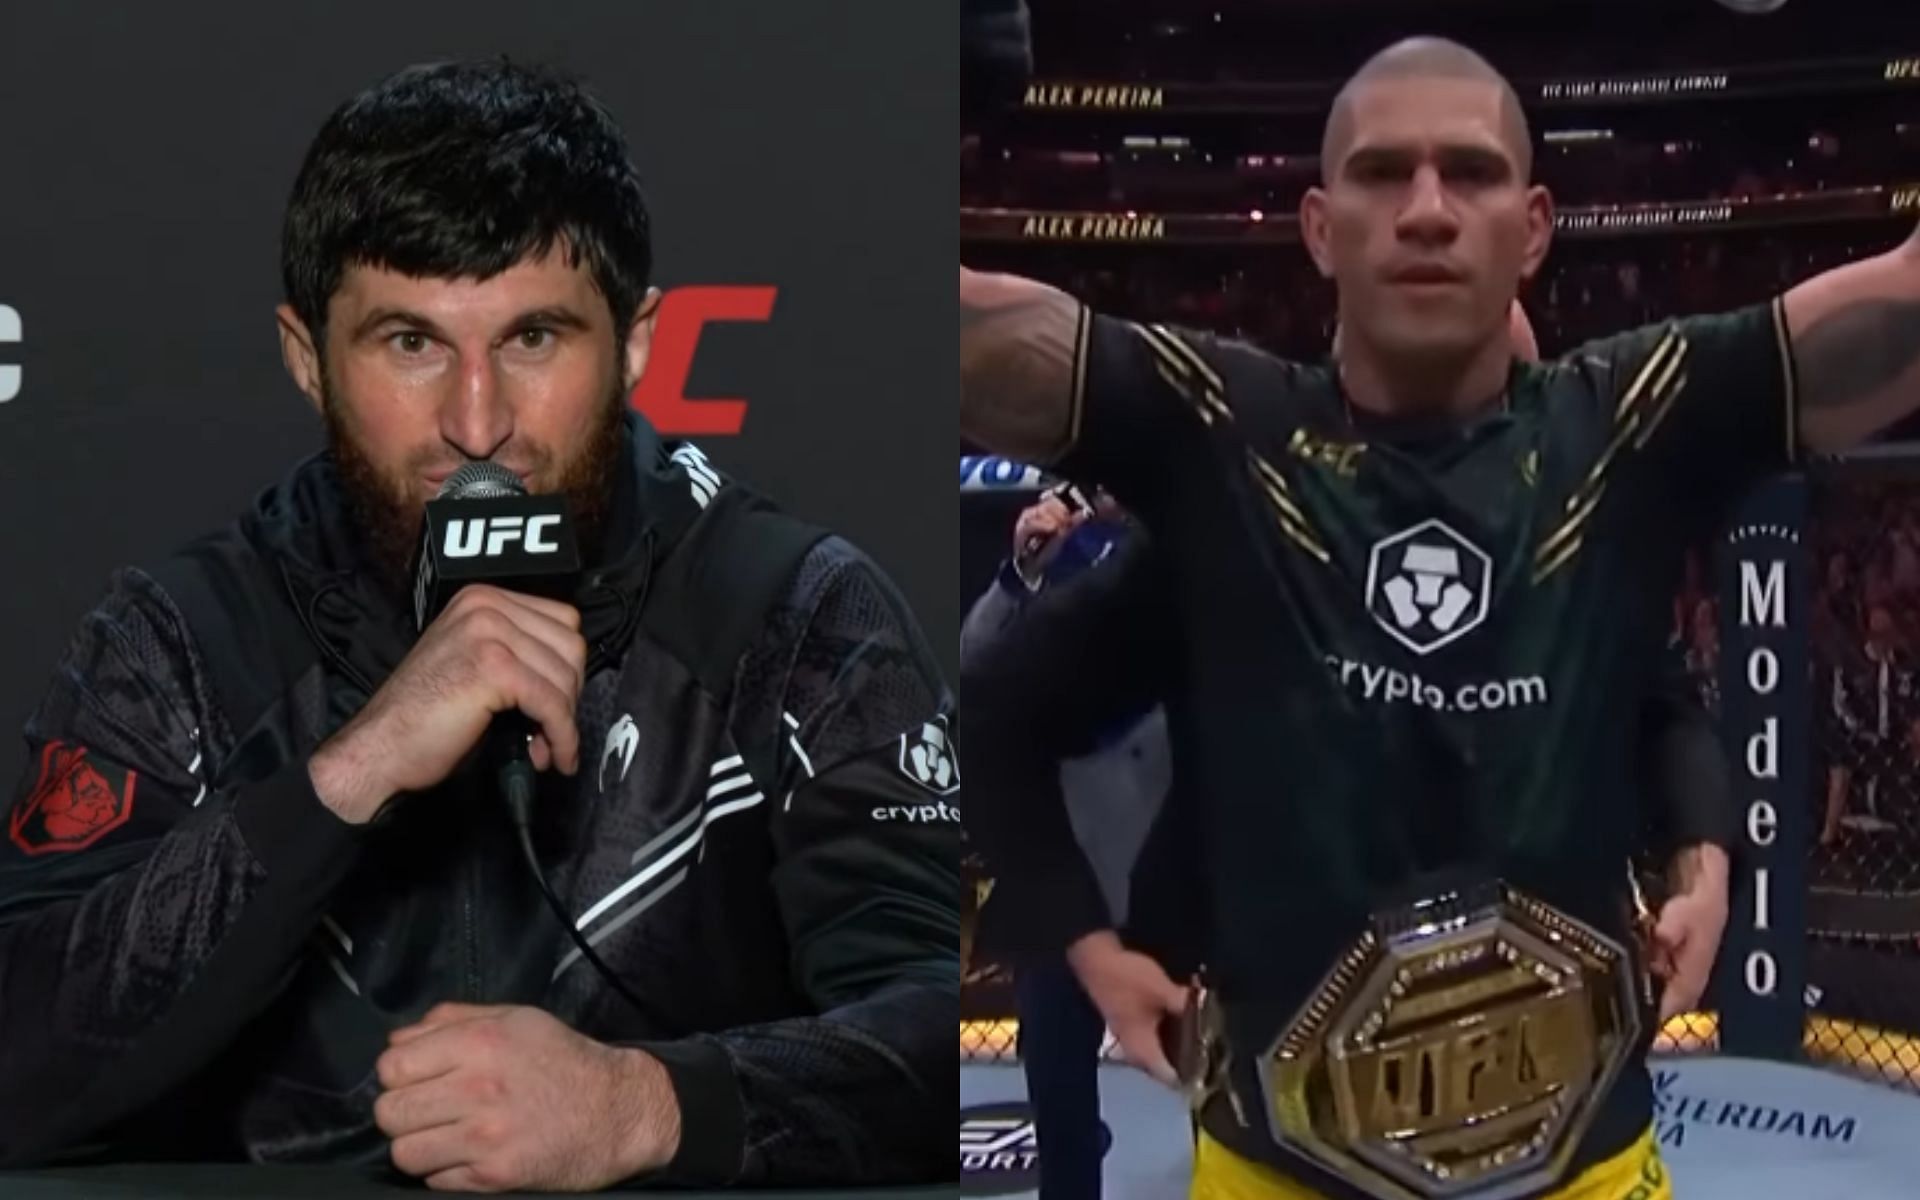 UFC legend suggested another method Magomed Ankalaev [Left] could have gained interest for a fight against Alex Pereira [Right] [Image courtesy: UFC - YouTube]